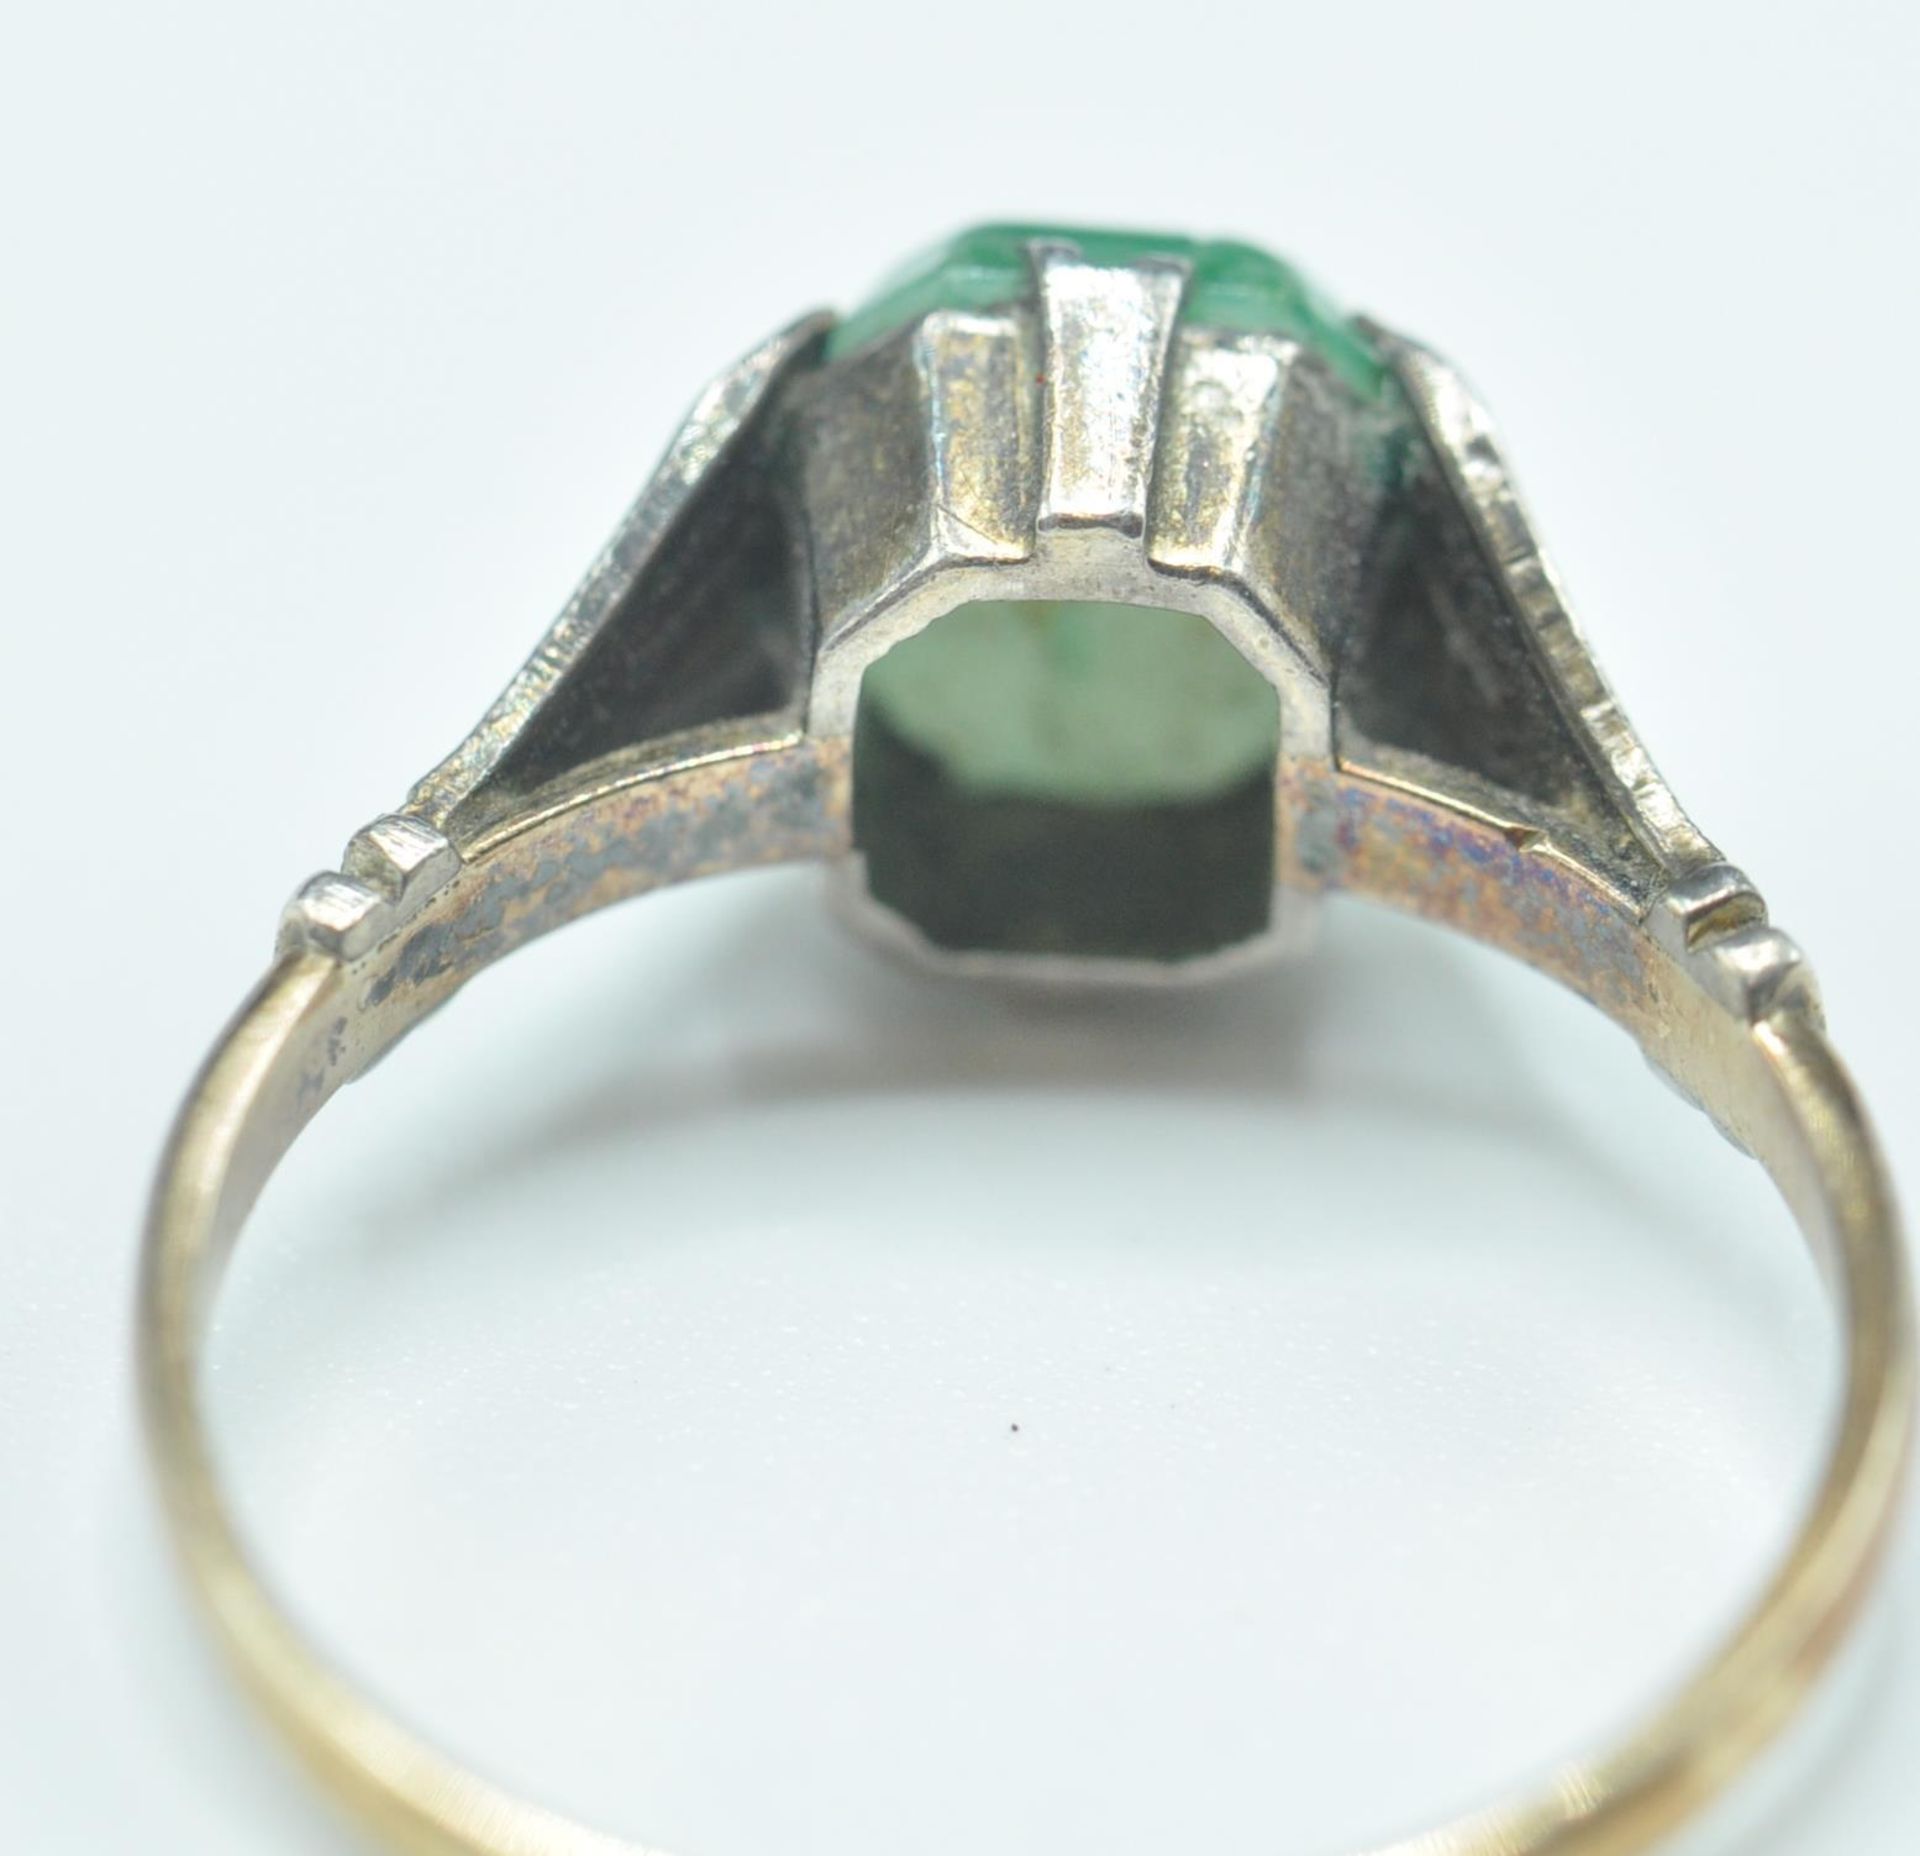 1930'S ART DECO 9CT GOLD GREEN STONE RING - Image 5 of 10